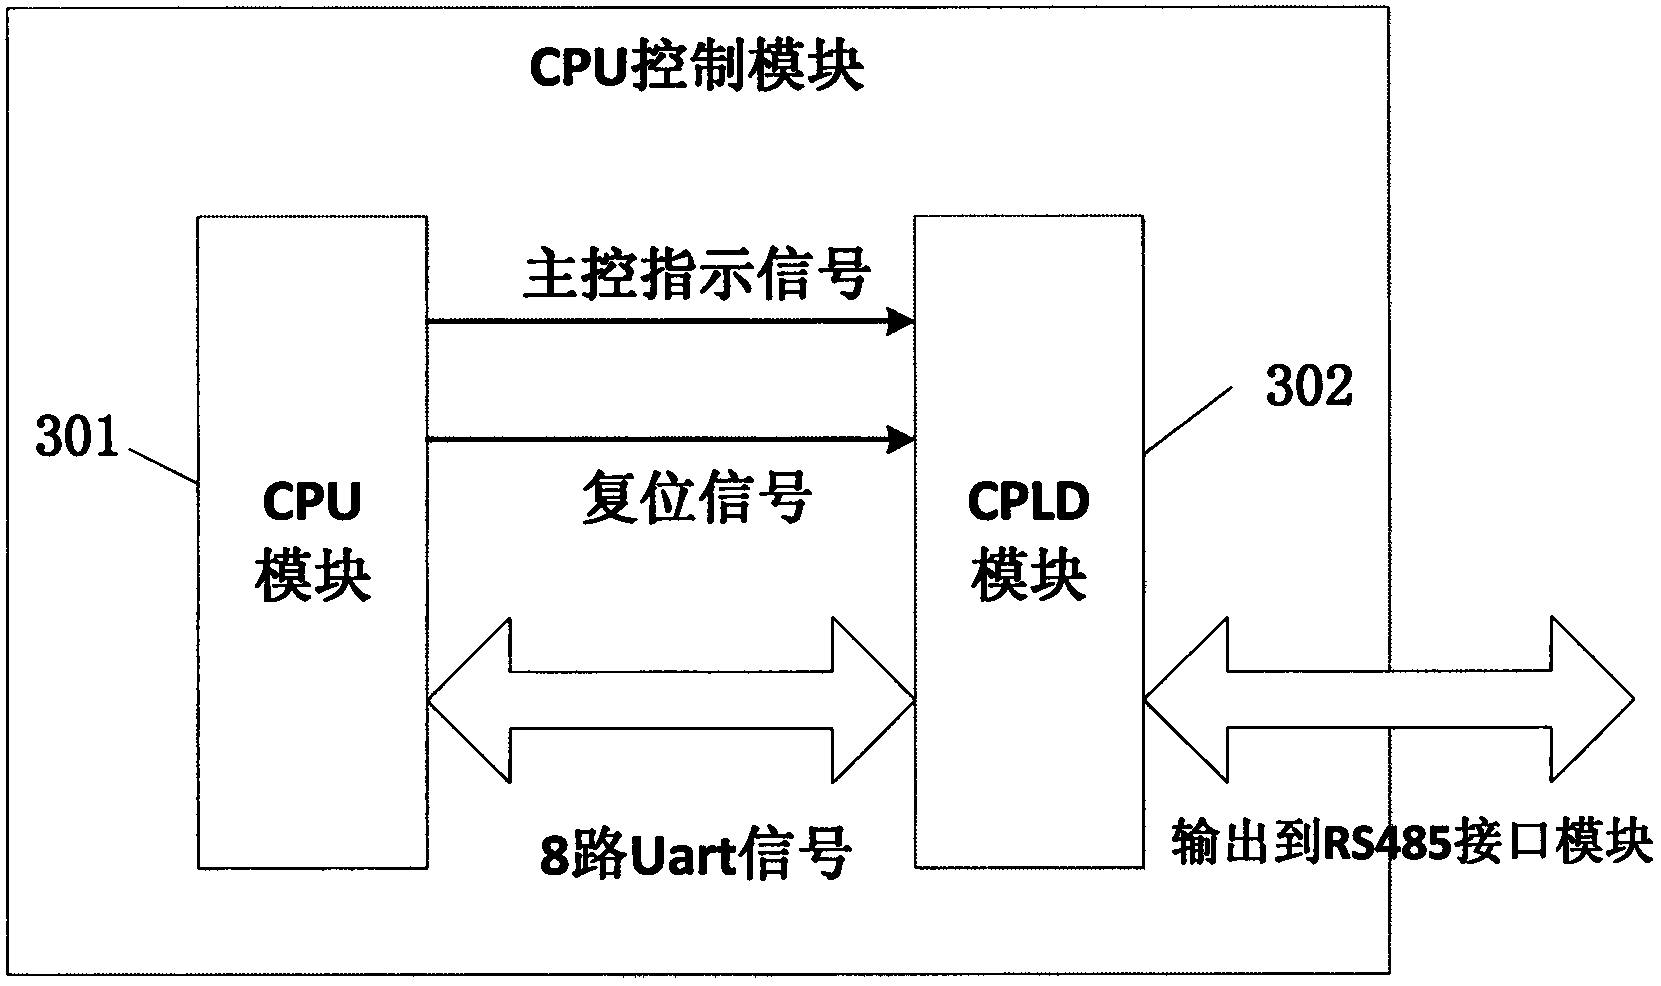 Device for protocol conversion from Ethernet to RS485 field bus